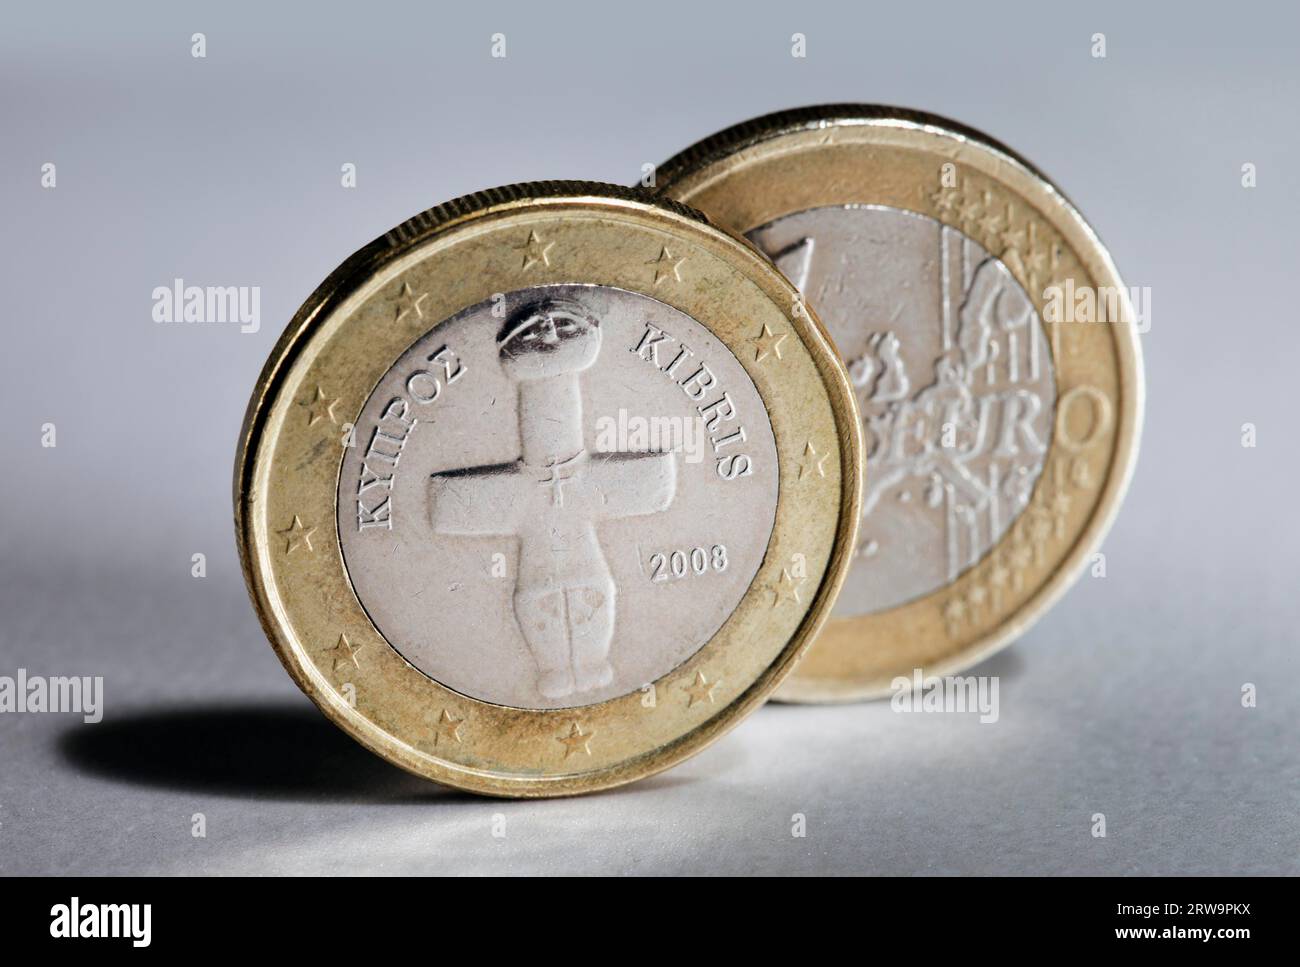 Two 1 Euro coins from Cyprus Stock Photo